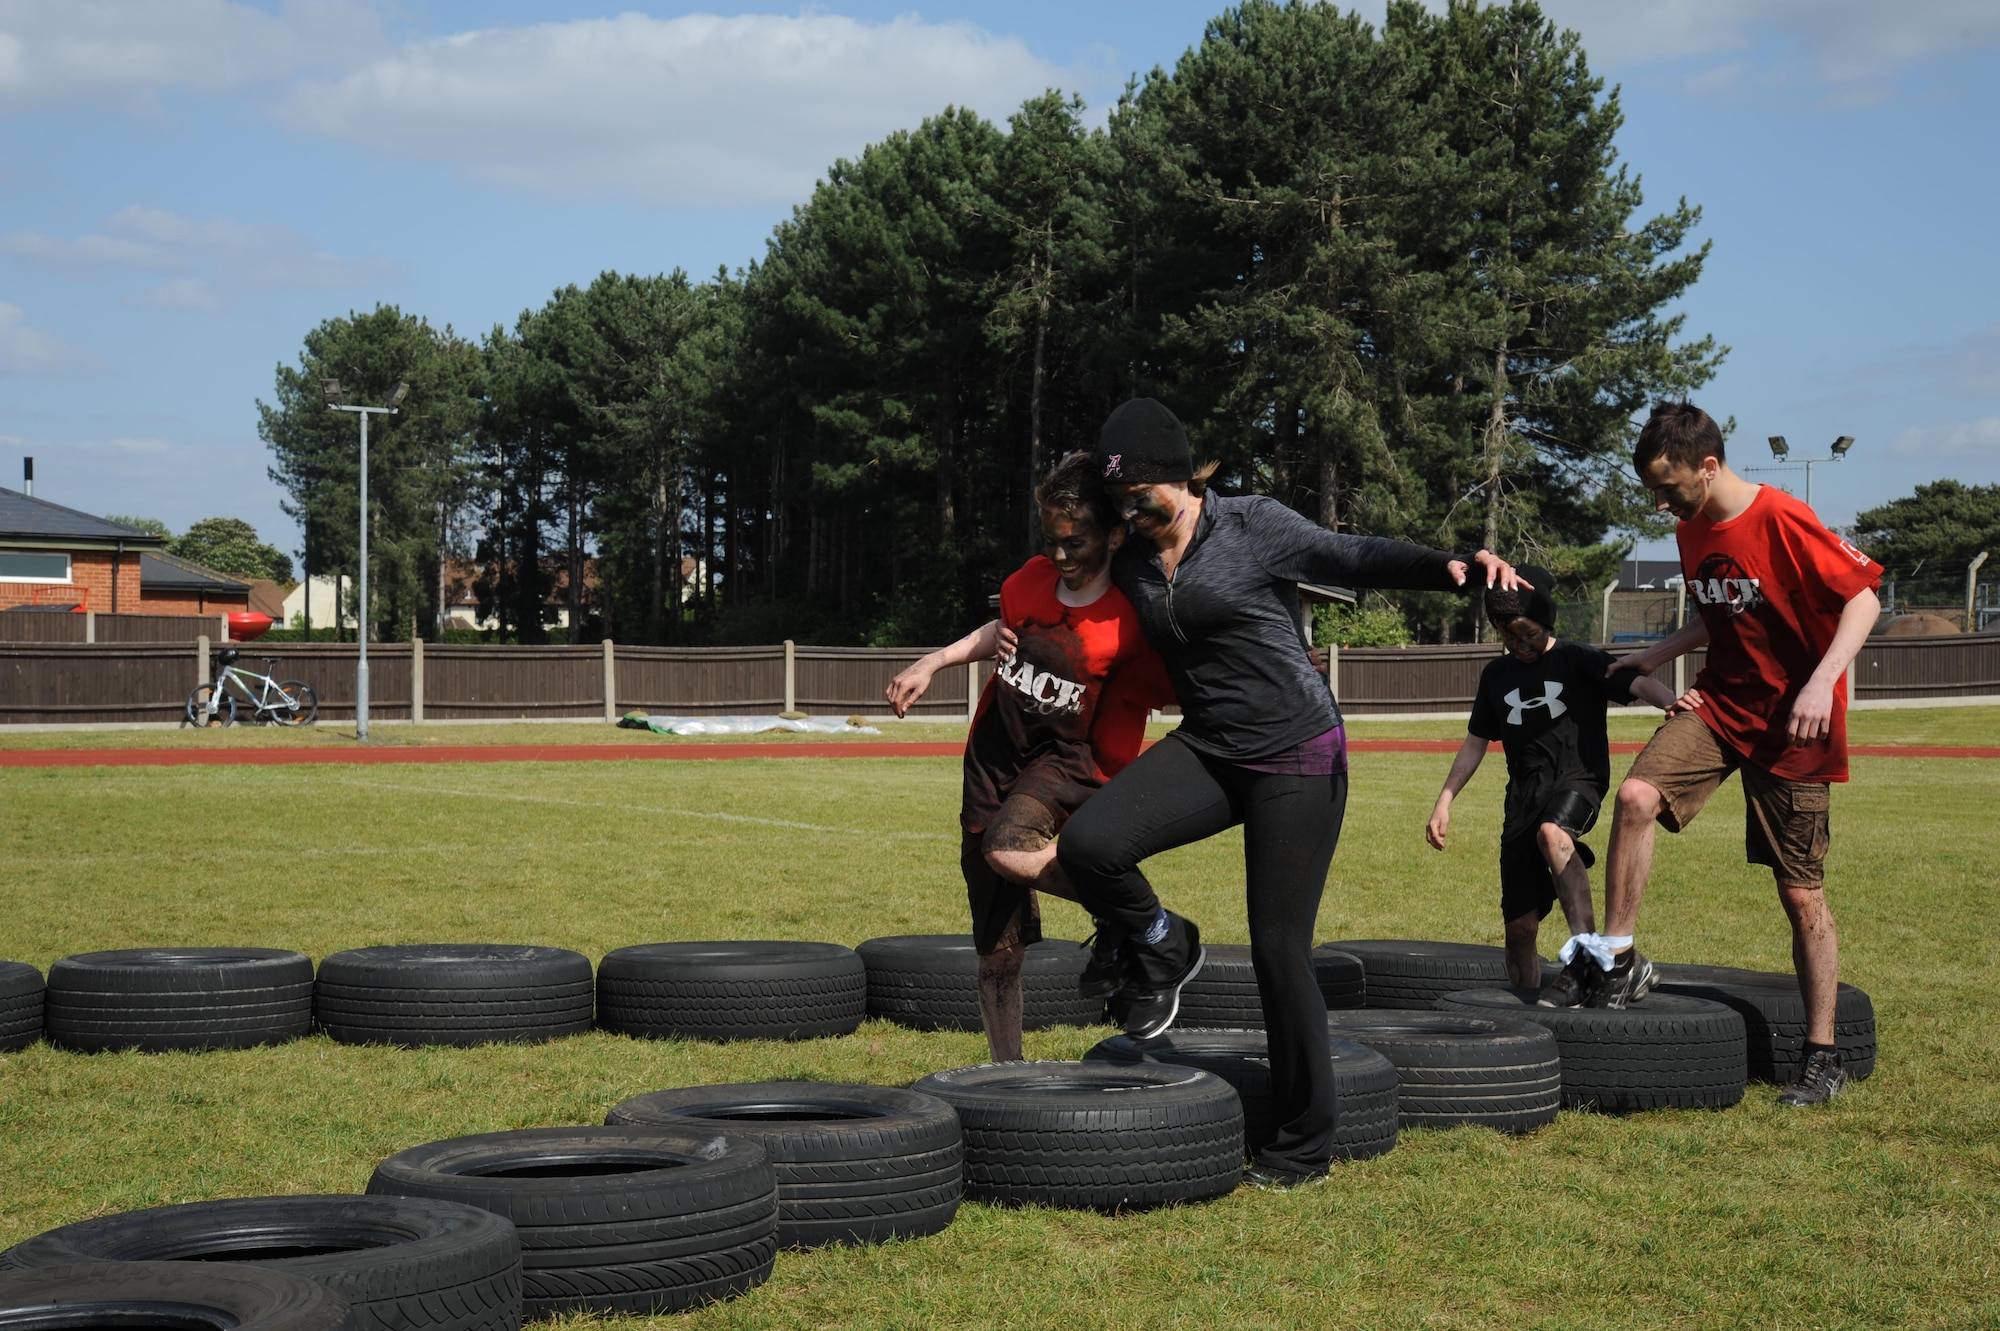 A mother and her three sons navigate through the three-legged tire obstacle during the “Momster Mash” May 16, 2015, at the Heritage Park sports fields on RAF Mildenhall, England. The event was hosted by the 352nd Special Operations Wing Preservation of Force and Families team and was aimed at providing an opportunity for mothers and their sons – traditionally a relationship with difficulties -- to bond. (U.S. Air Force photo by Tech. Sgt. Stacia Zachary)